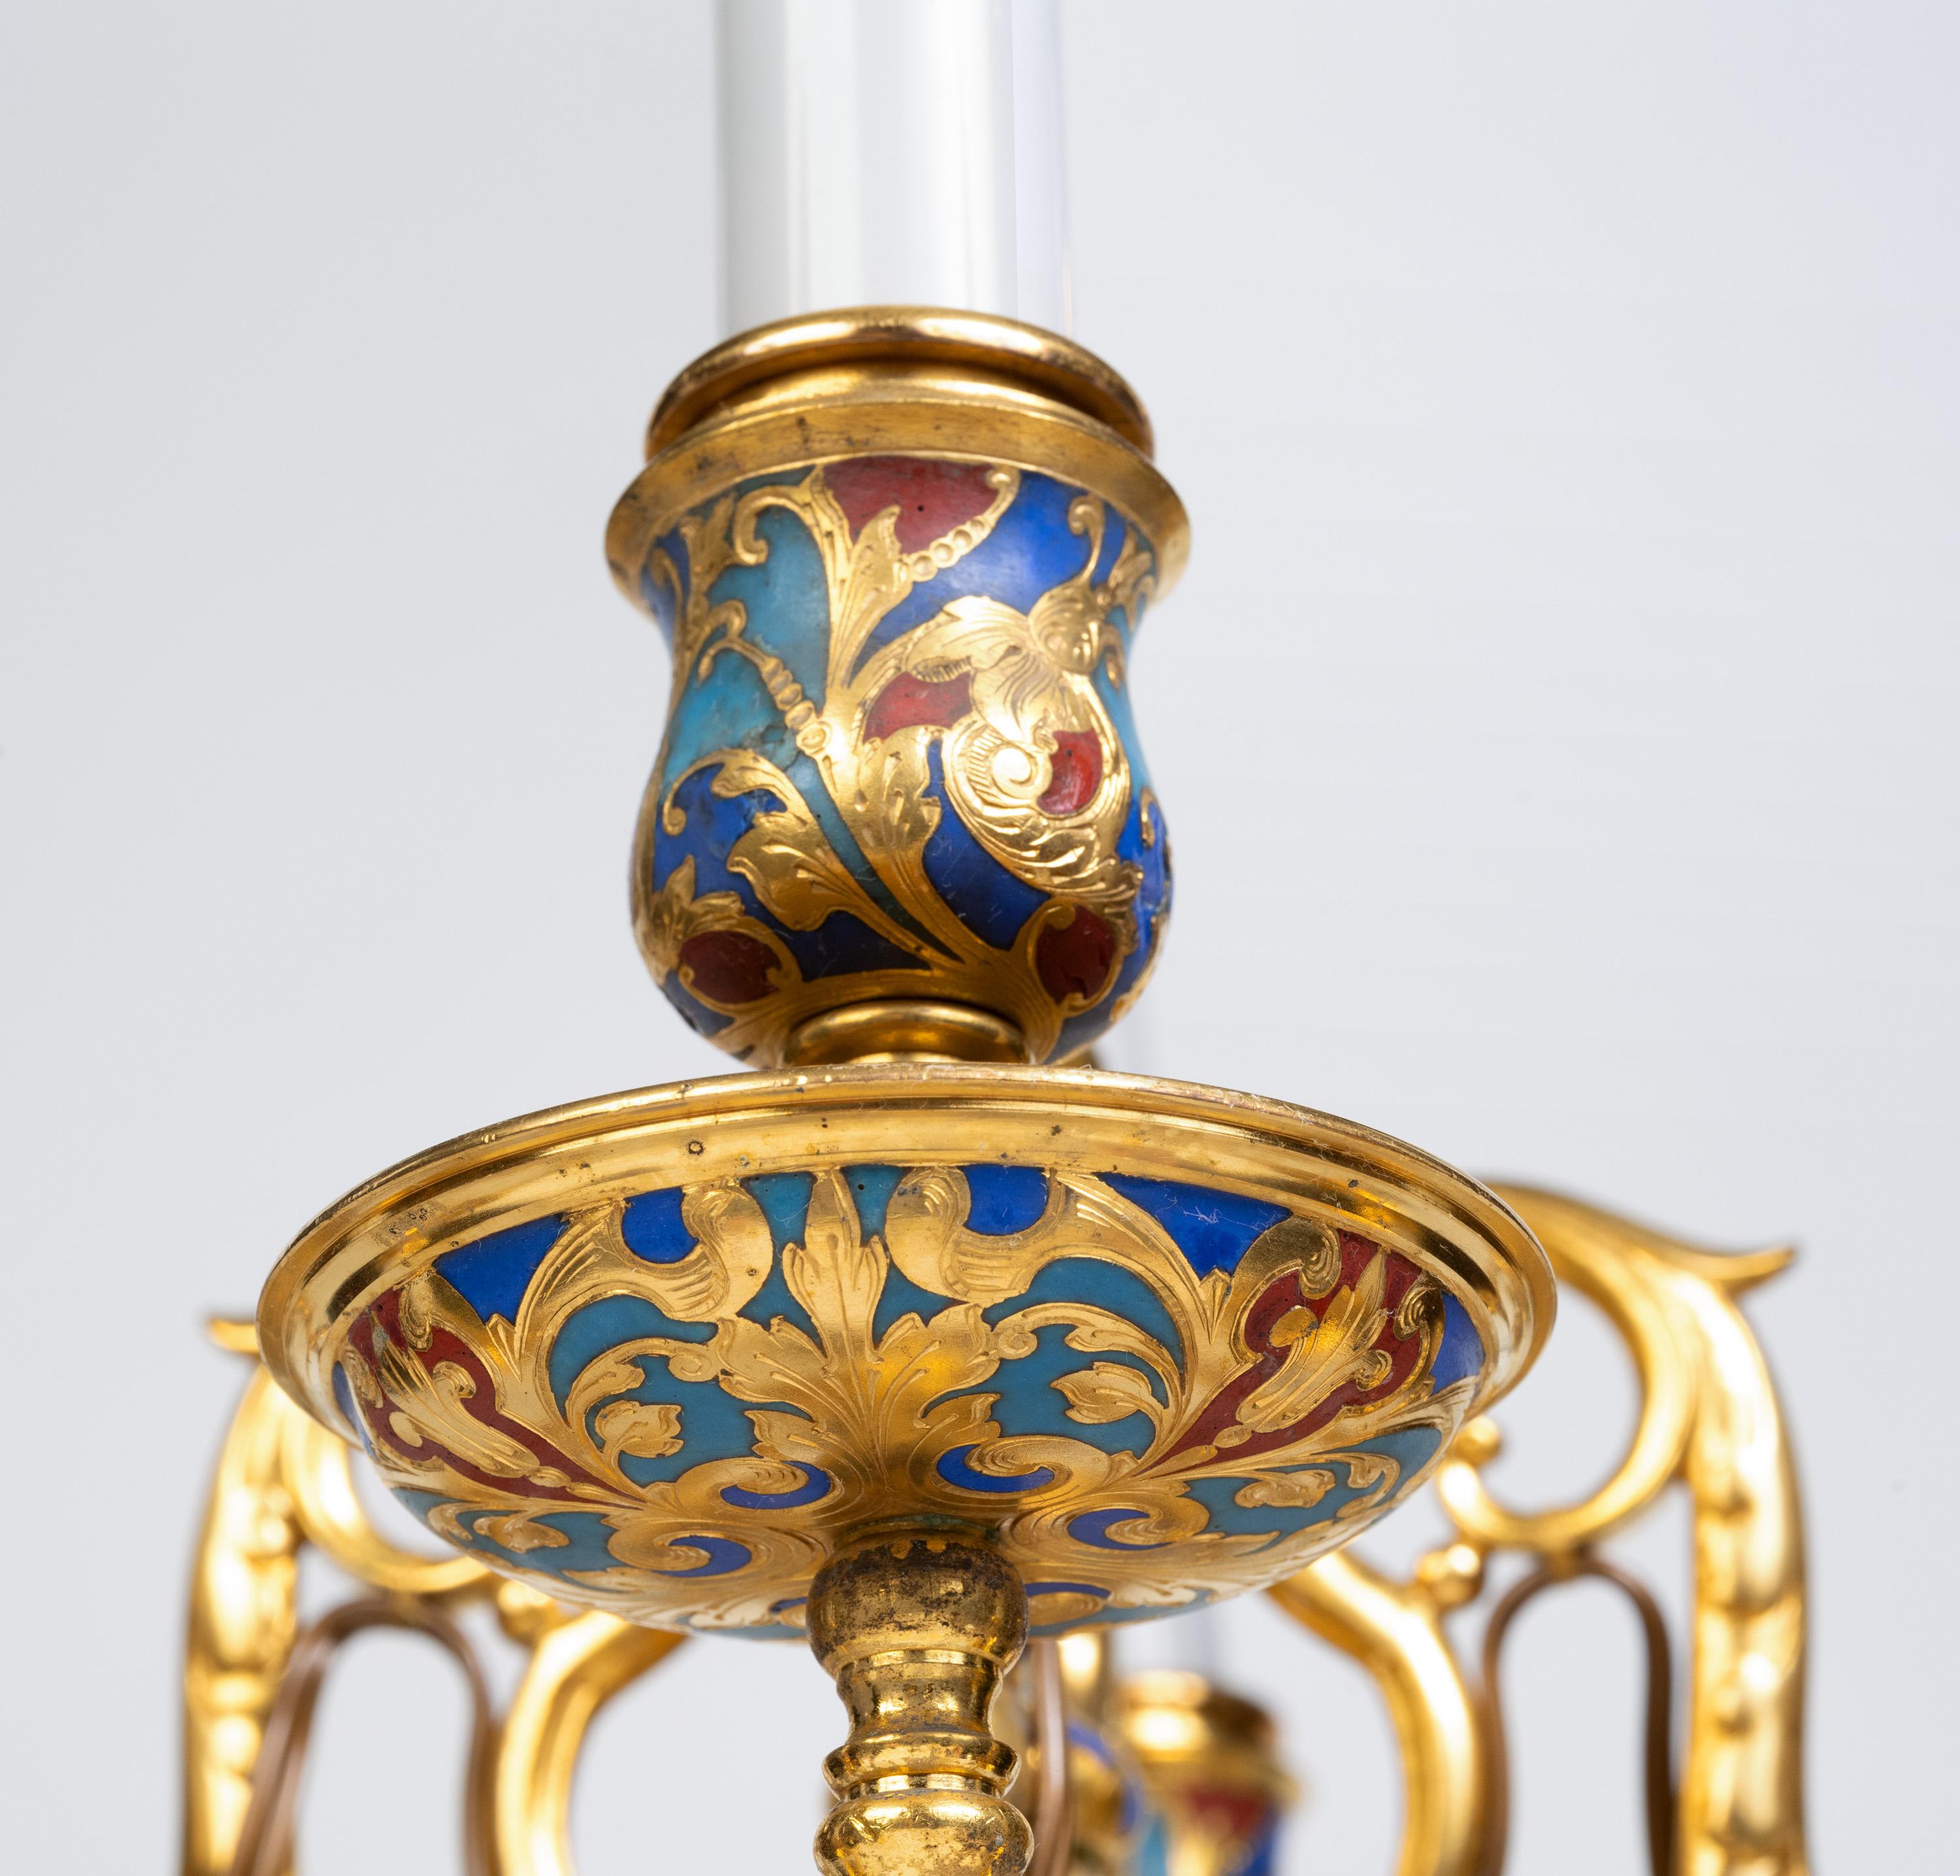 An Exceptional Pair of Champleve Enamel Ormolu Candelabra by Sevin & Barbedienne For Sale 9